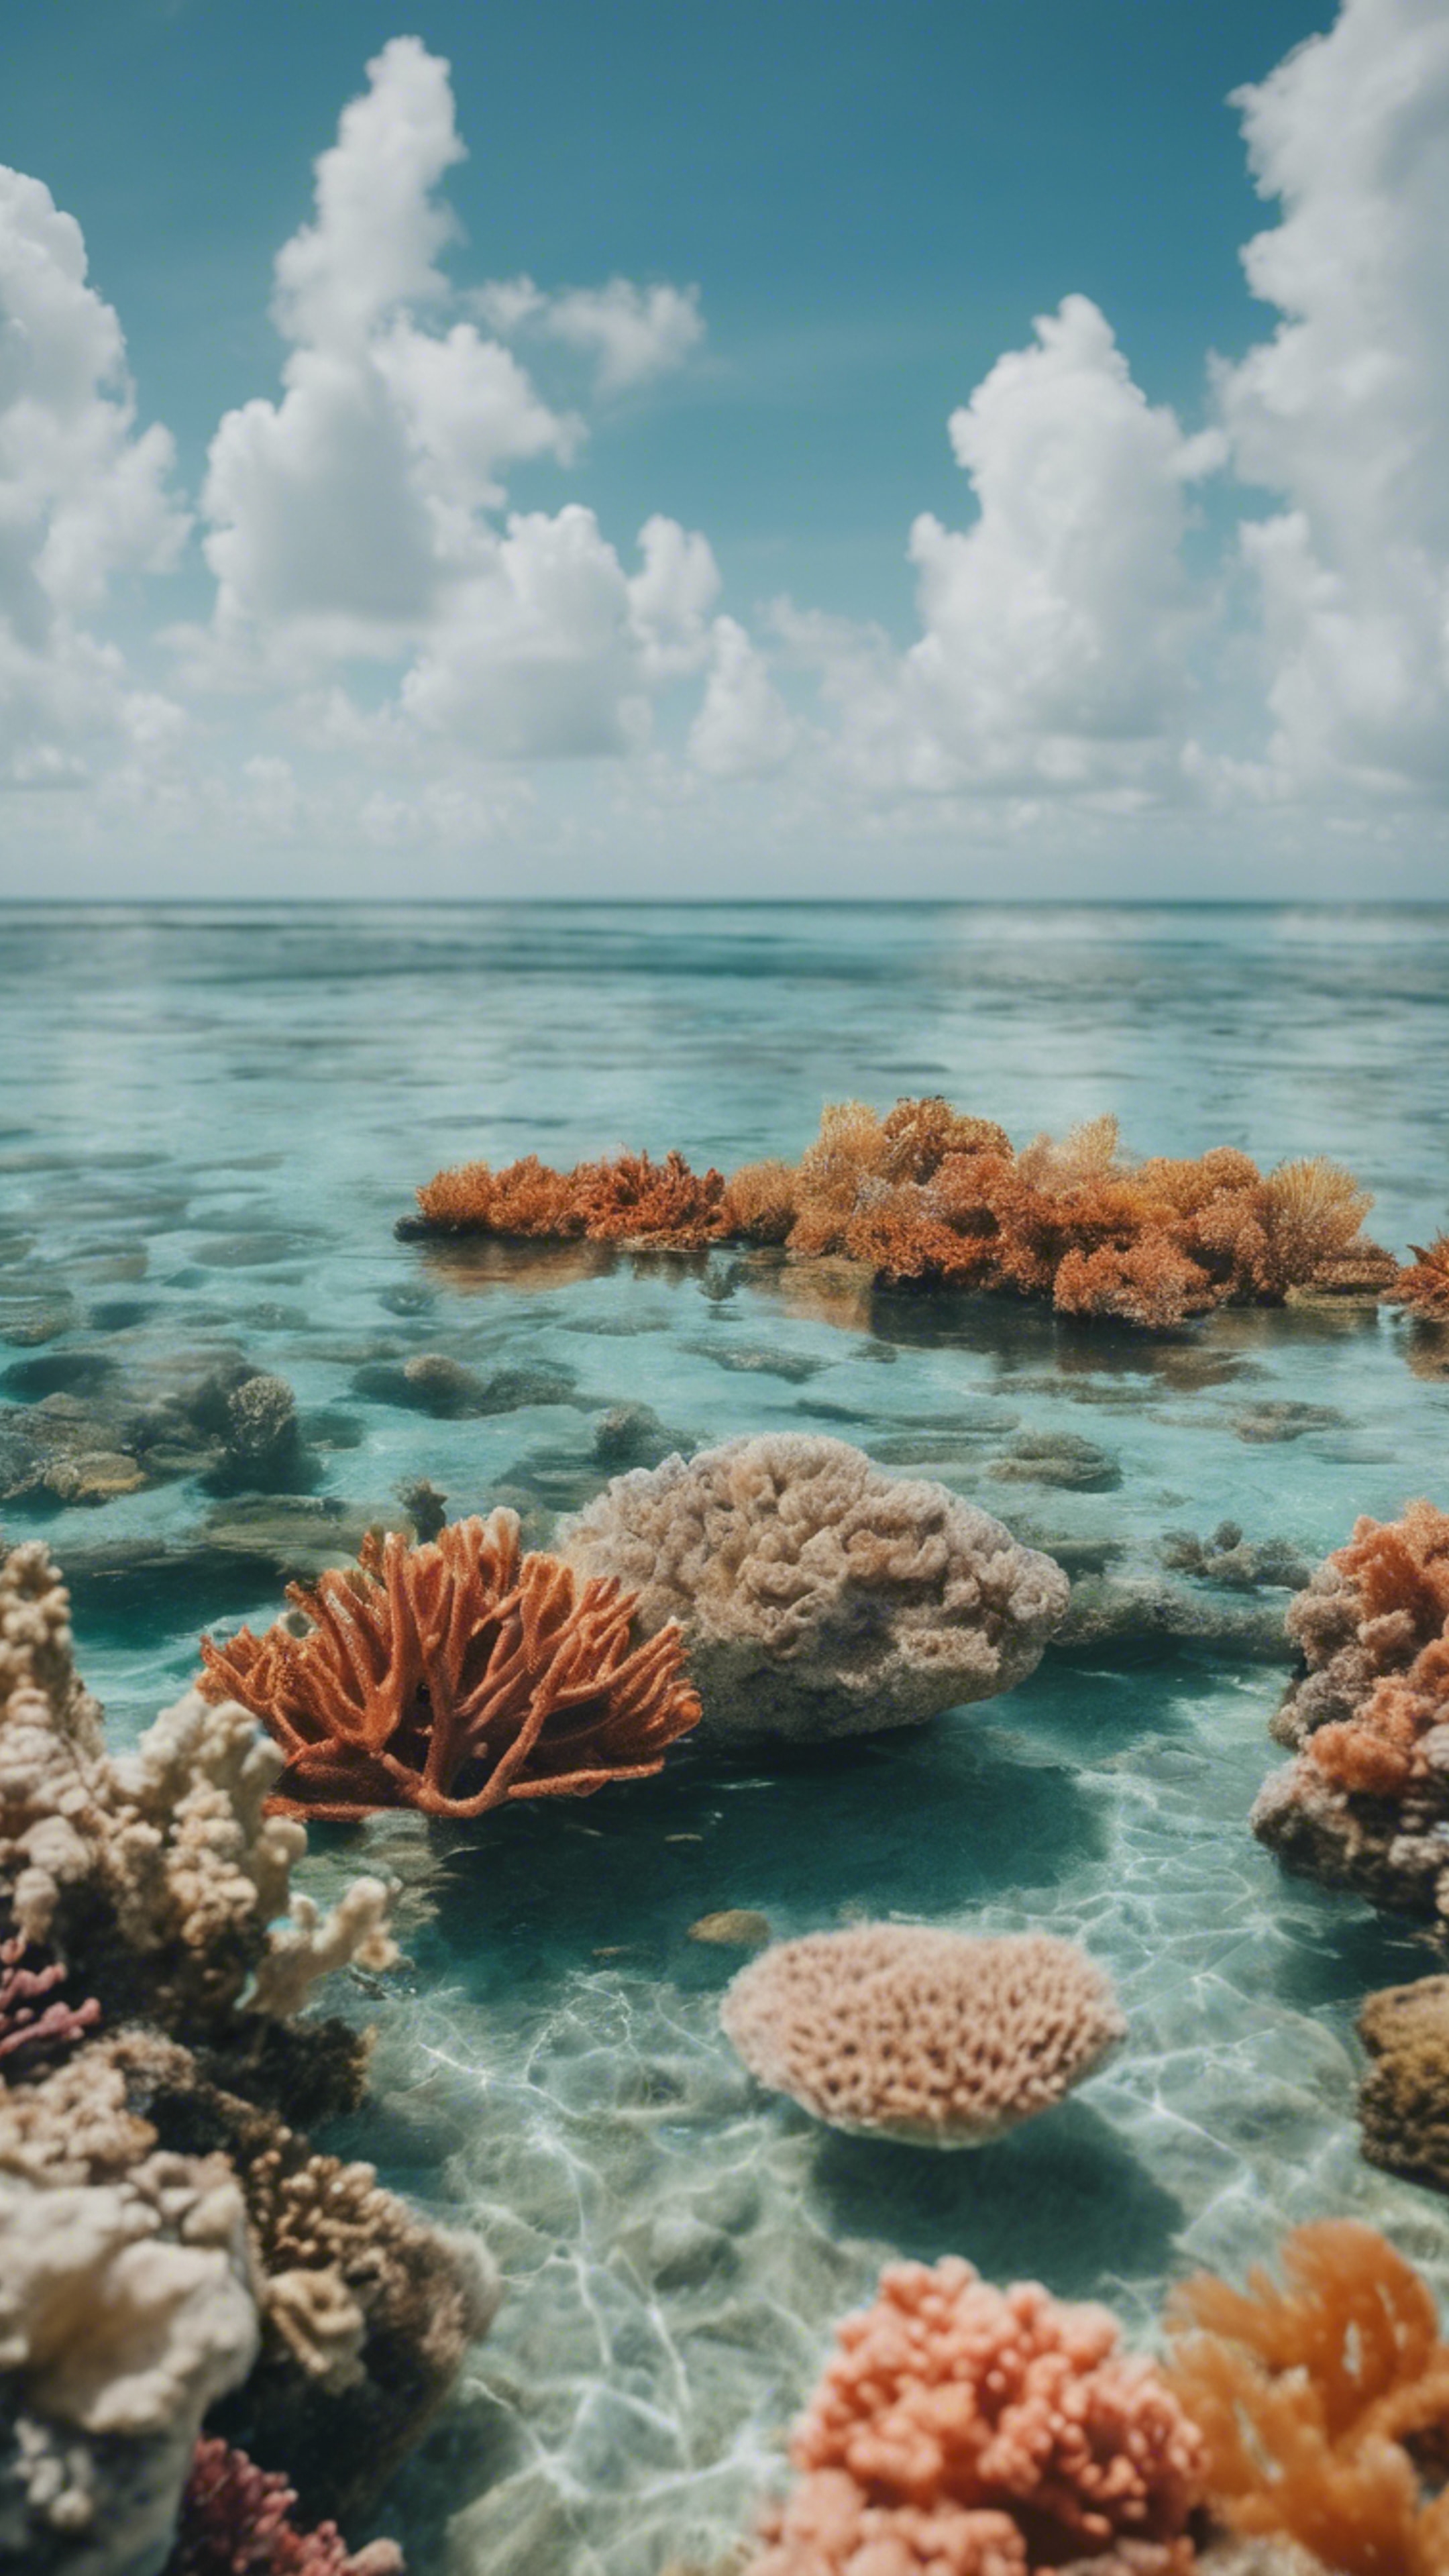 A serene view of the Florida Keys with crystal clear water and a colorful coral reef visible underwater. کاغذ دیواری[53a9c37260d942df83c4]